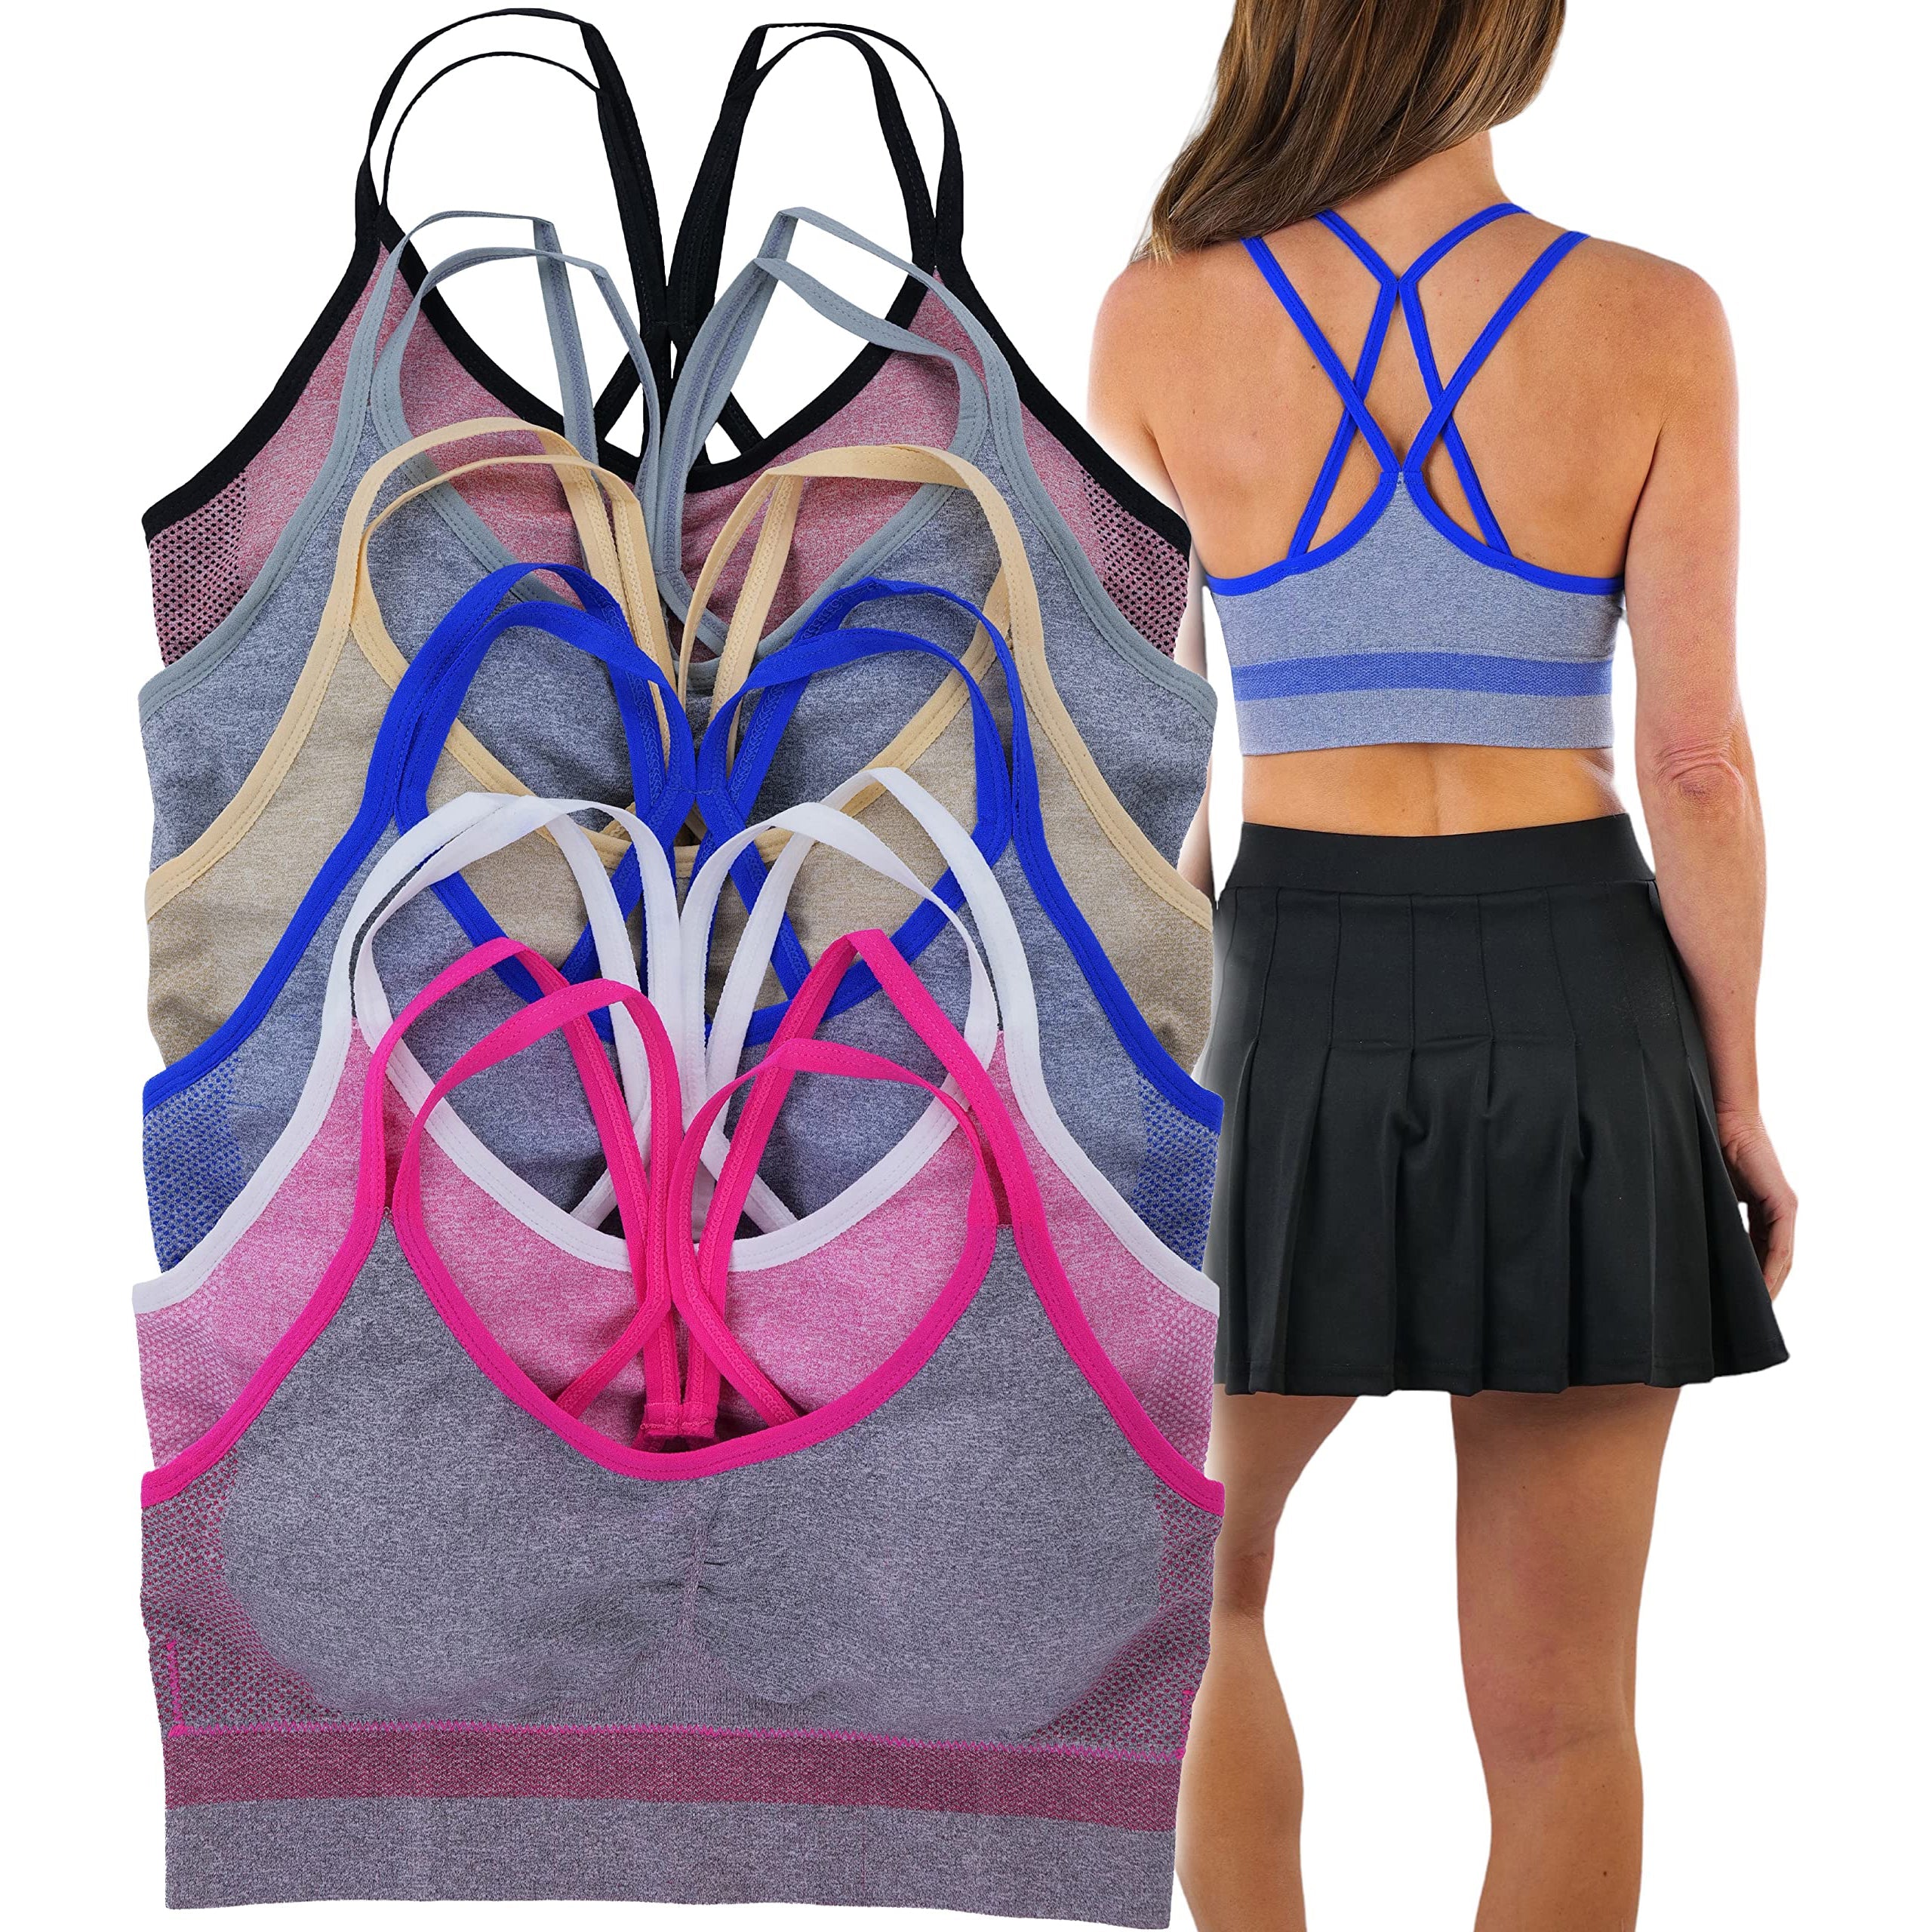  Sport Bras For Women Pack Of 6 With Pads Womens Sports